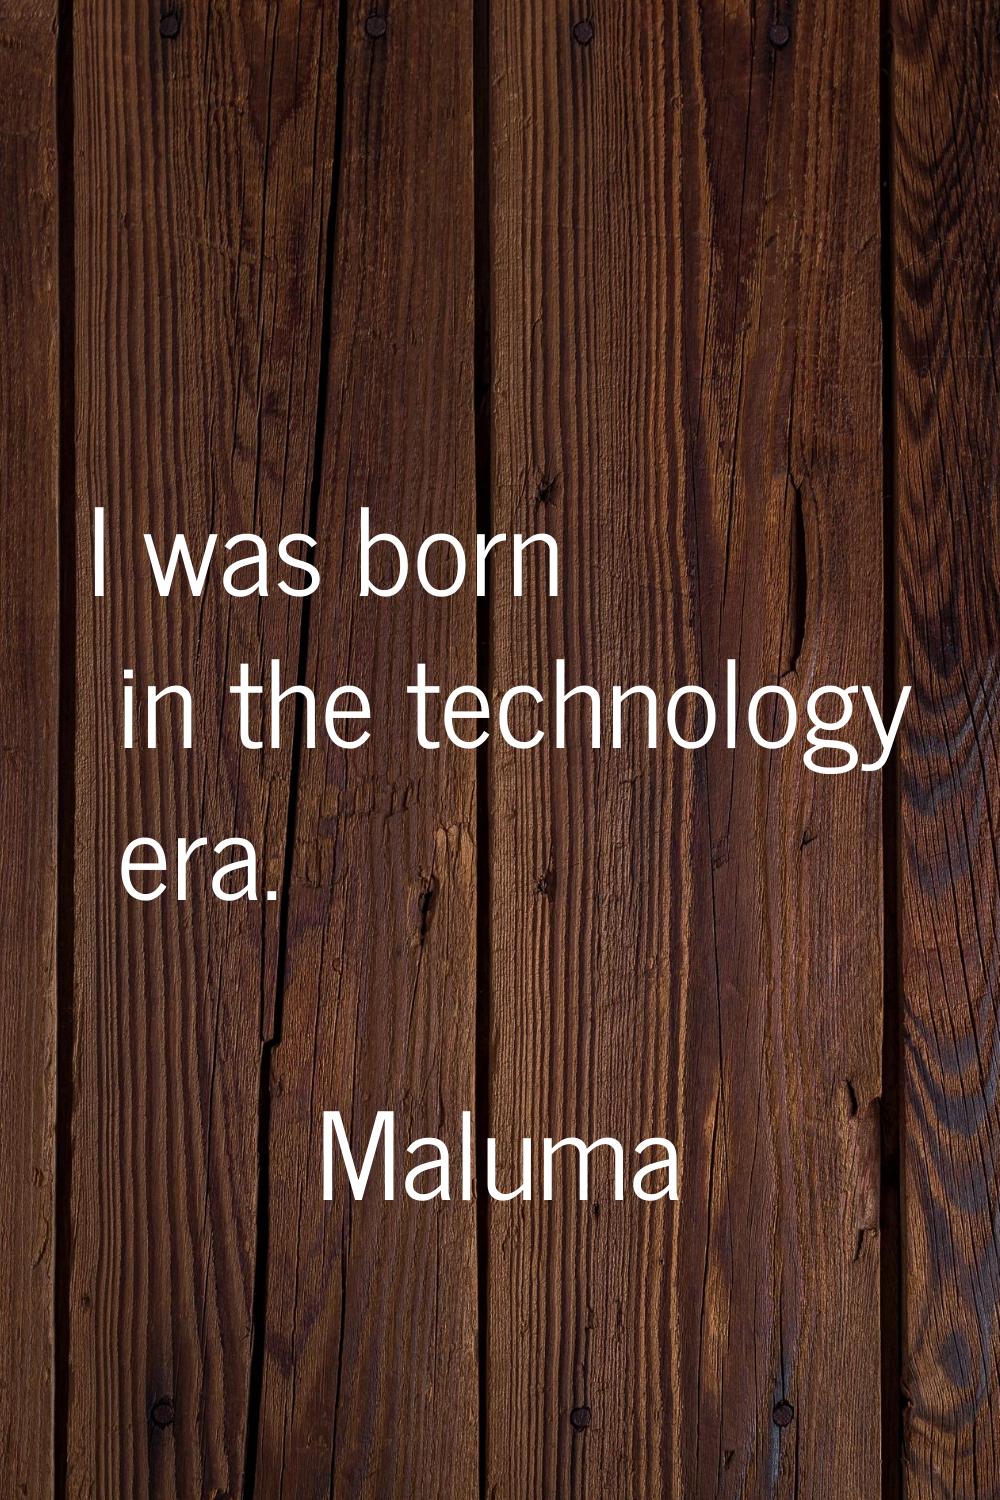 I was born in the technology era.